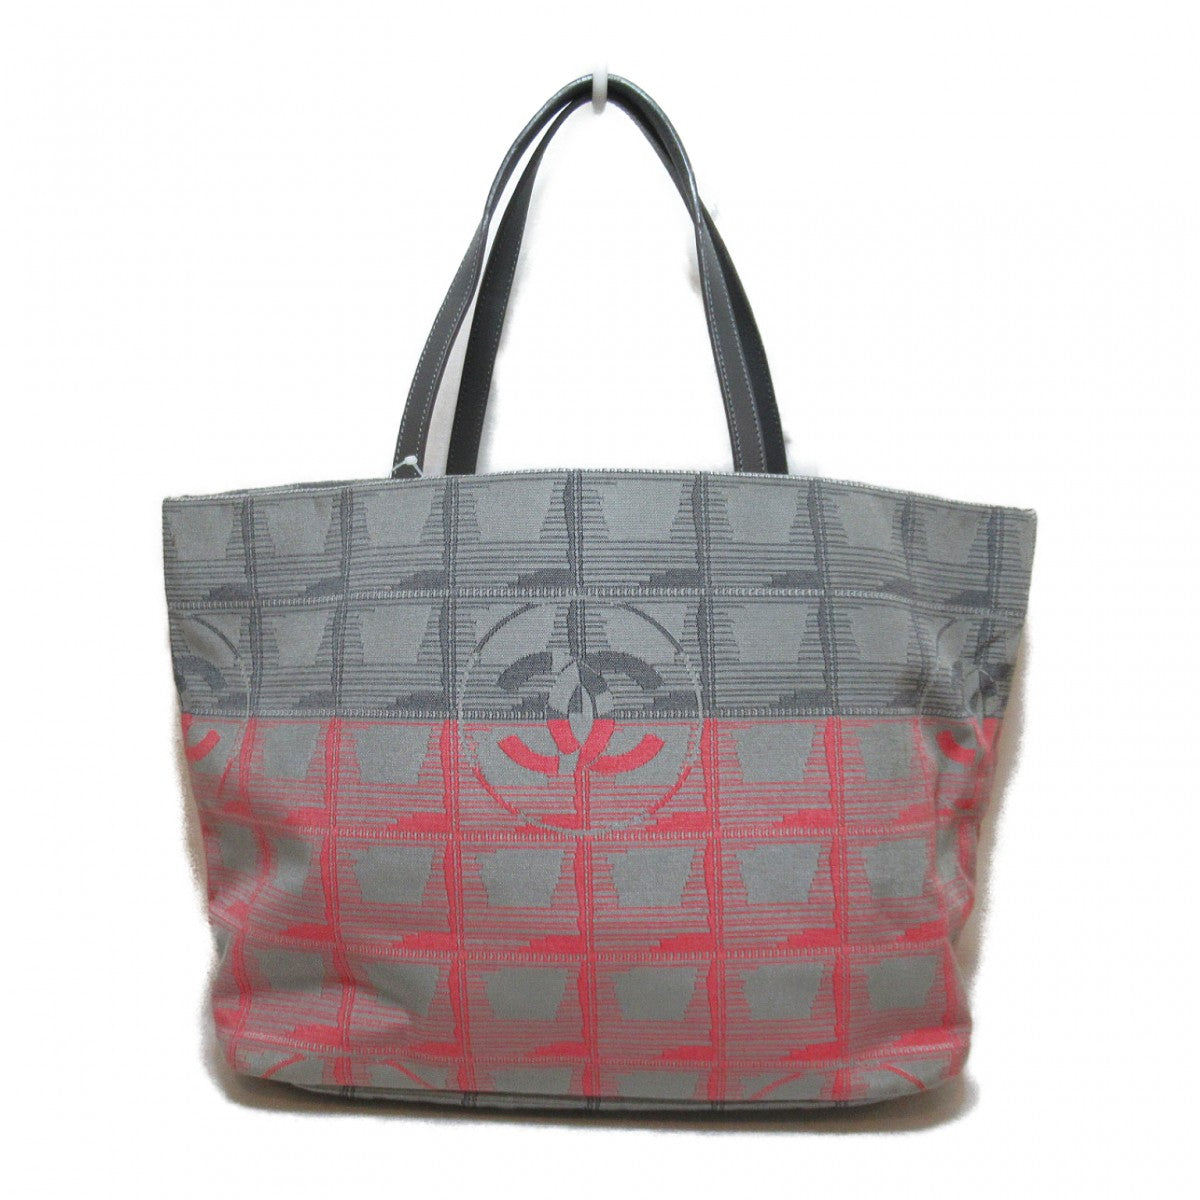 New Travel Line Tote Bag A47147